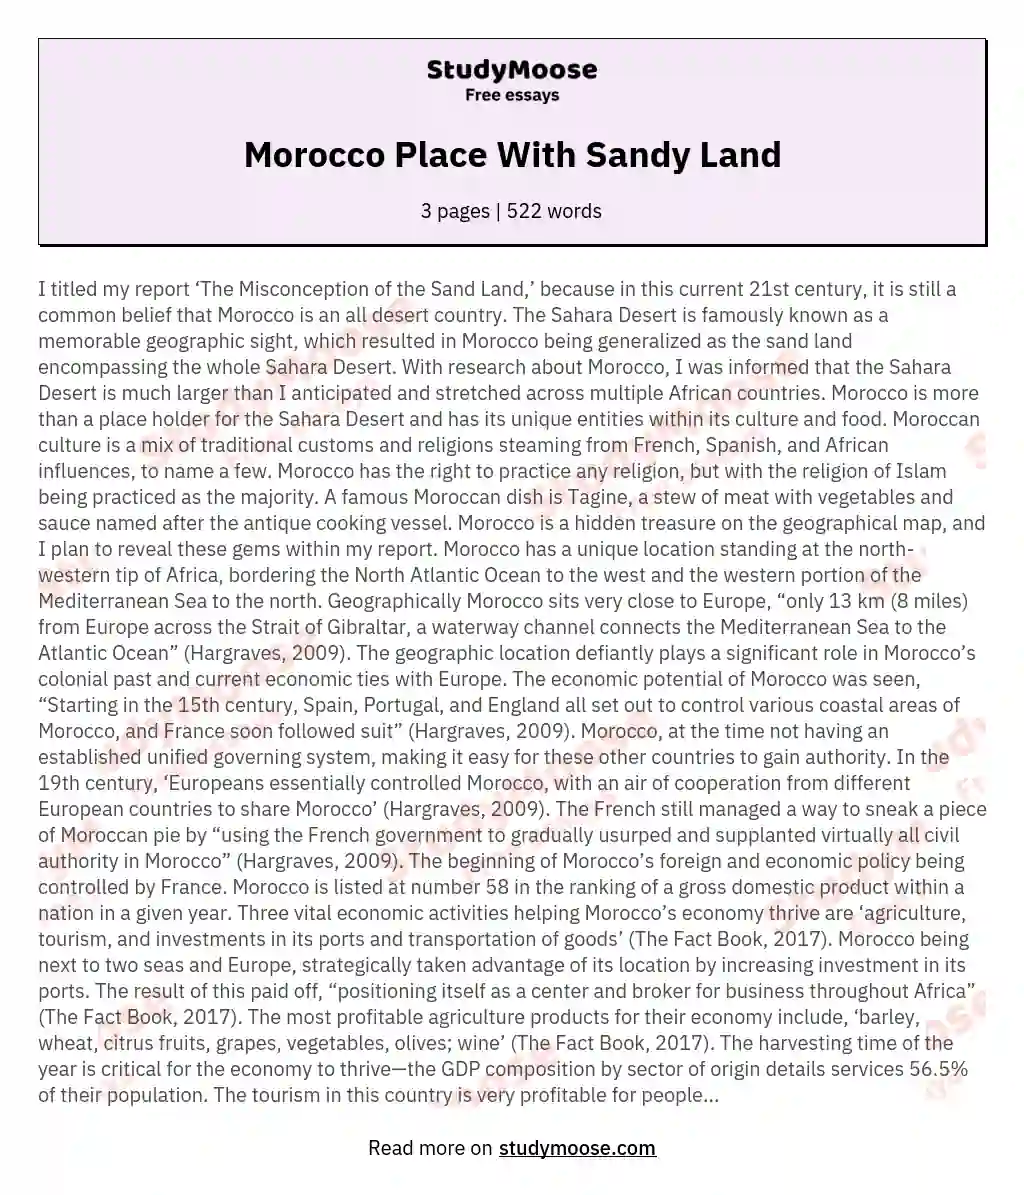 Morocco Place With Sandy Land essay